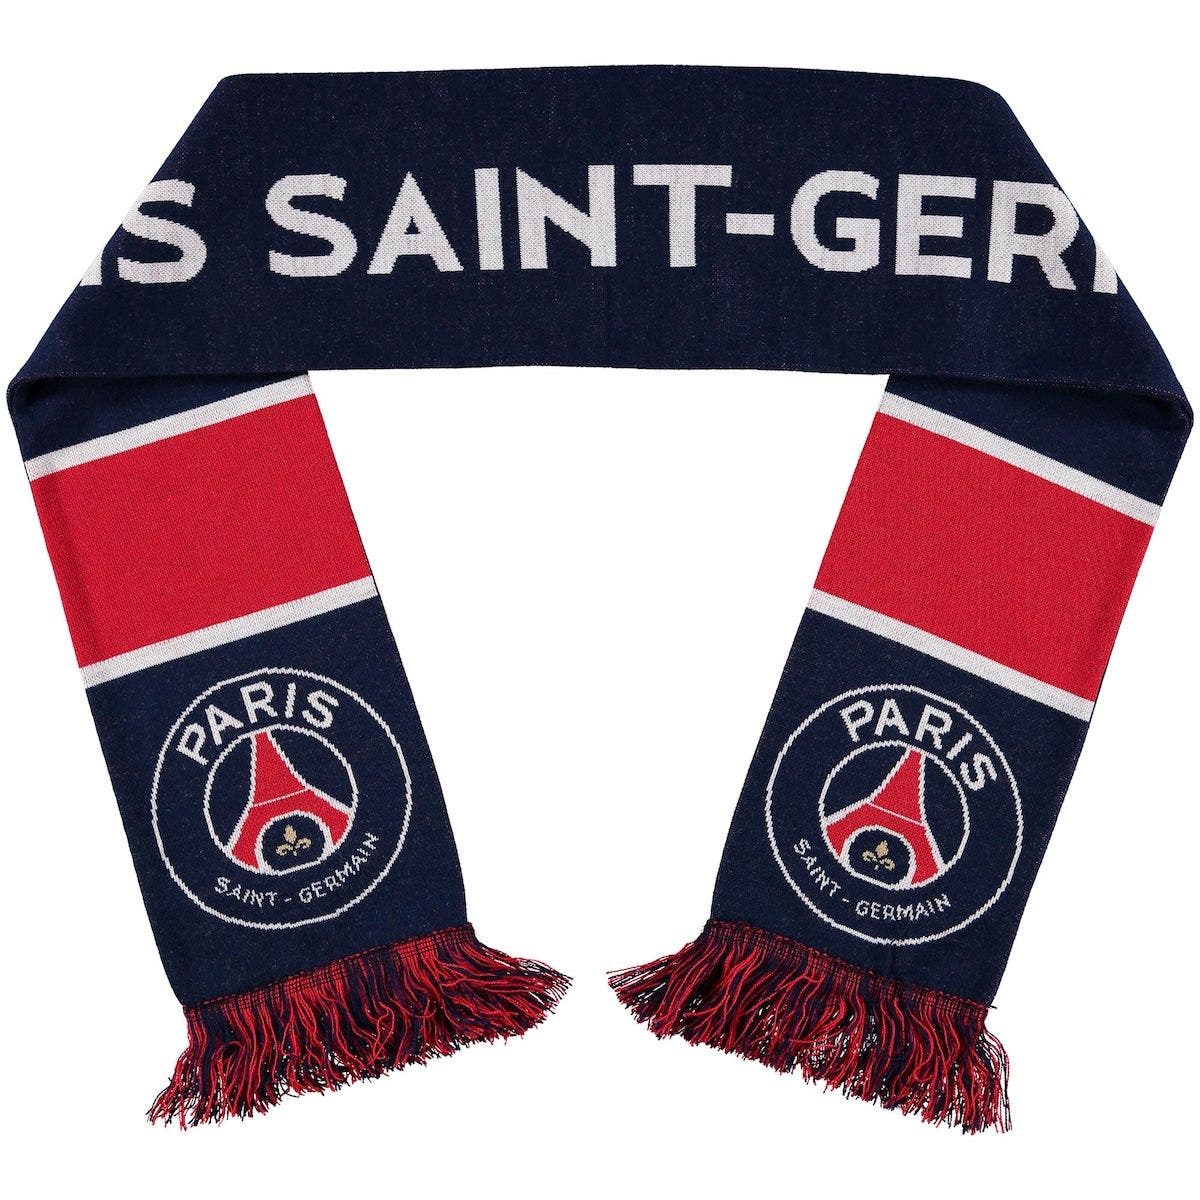 Paris Saint Germain Fc 4 Inch Soft Ball Official Foot Licensed Product Gift 